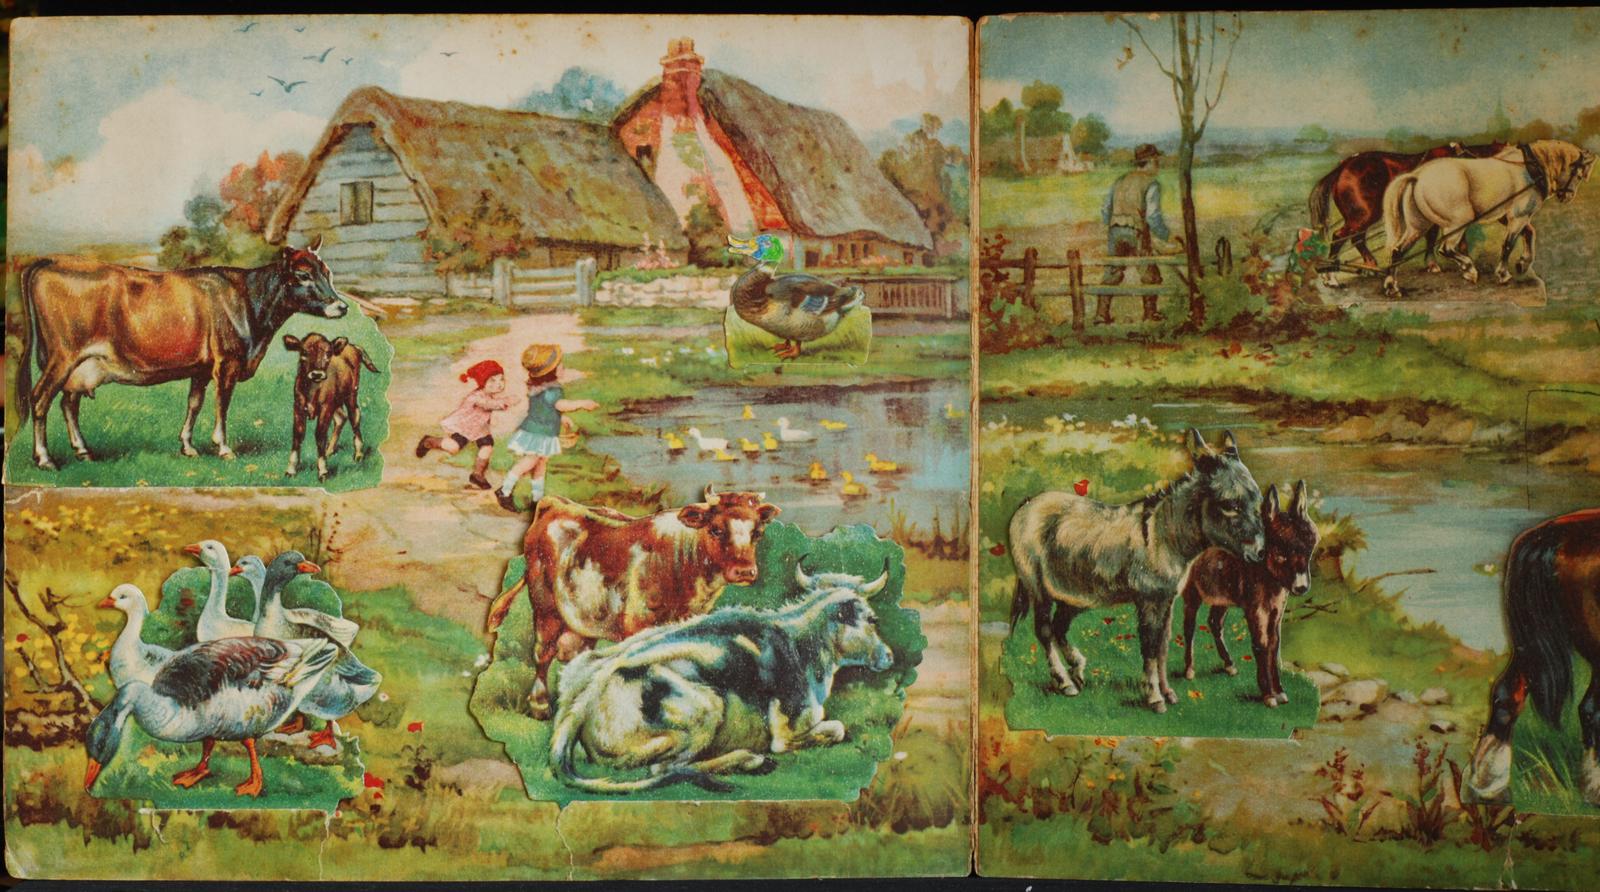 mbb001314b_-_Unnamed_-_Father_Tuck_s_Meadowsweet_Farm.Panorama_With_Movable_Pictures_-_Contains_Illustrations.jpg